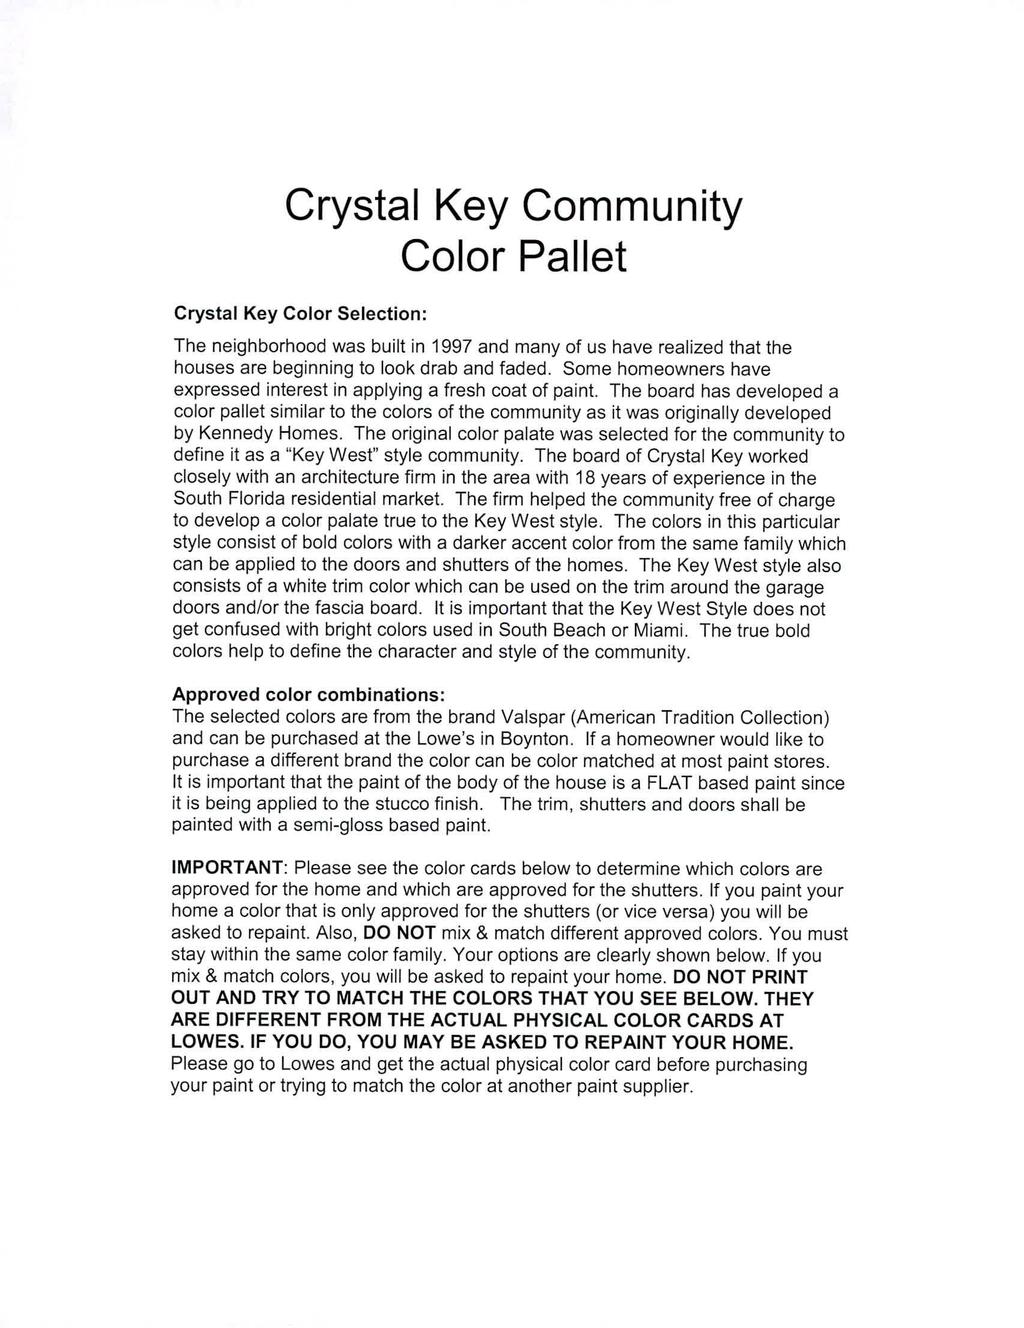 Crystal Key Community Color Pallet Crystal Key Color Selection: The neighborhood was built in 1997 and many of us have realized that the houses are beginning to look drab and faded.